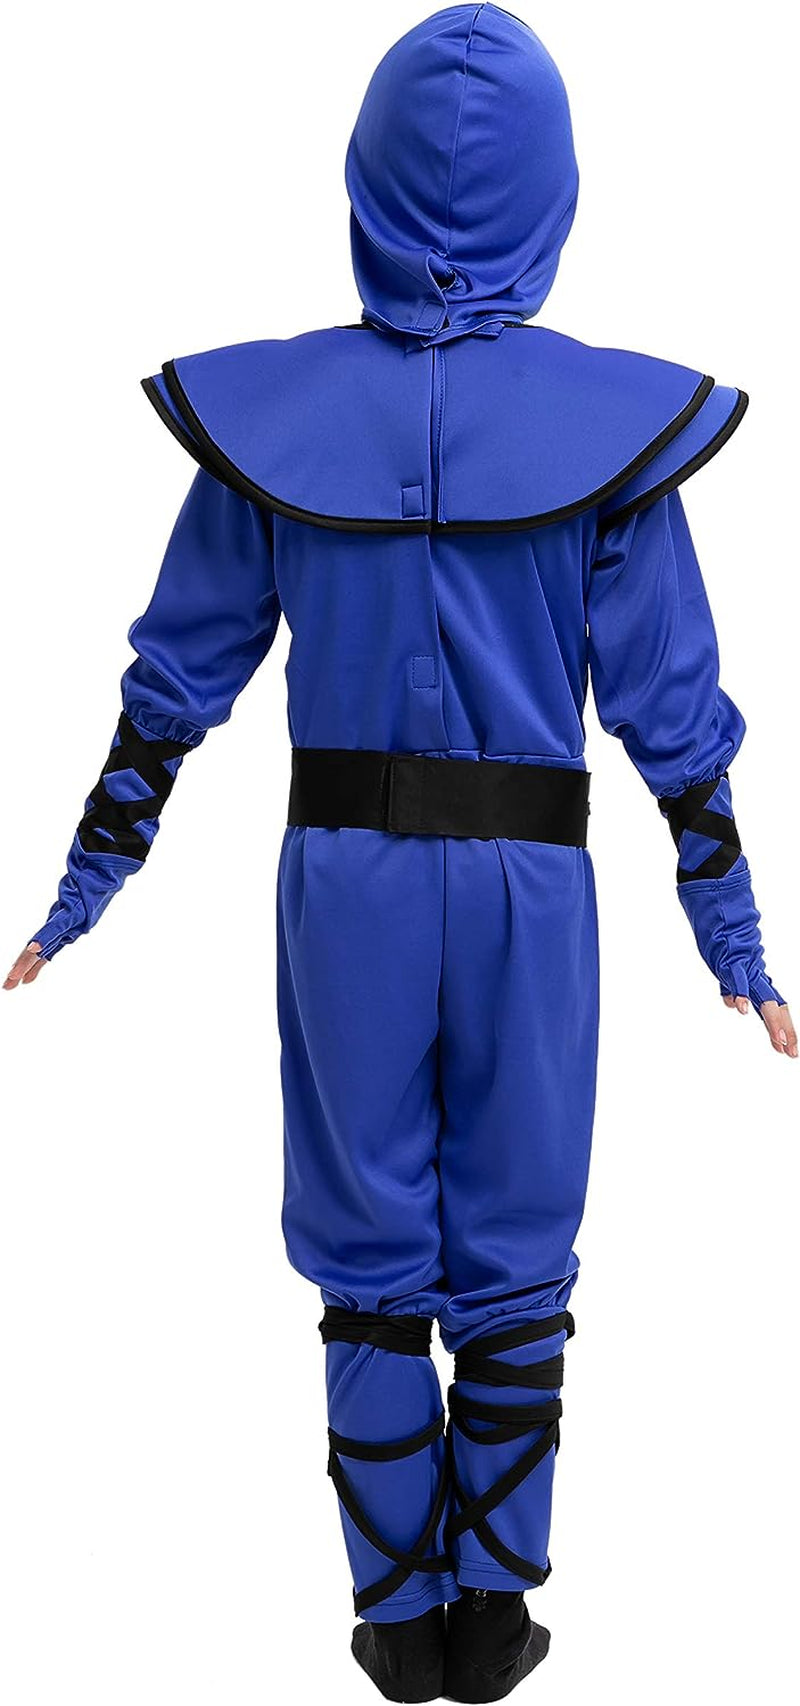 Spooktacular Creations Striking Blue Ninja Costume for Child Stealth Costume Halloween Kids Kung Fu Outfit (Small (5-7 Yr))